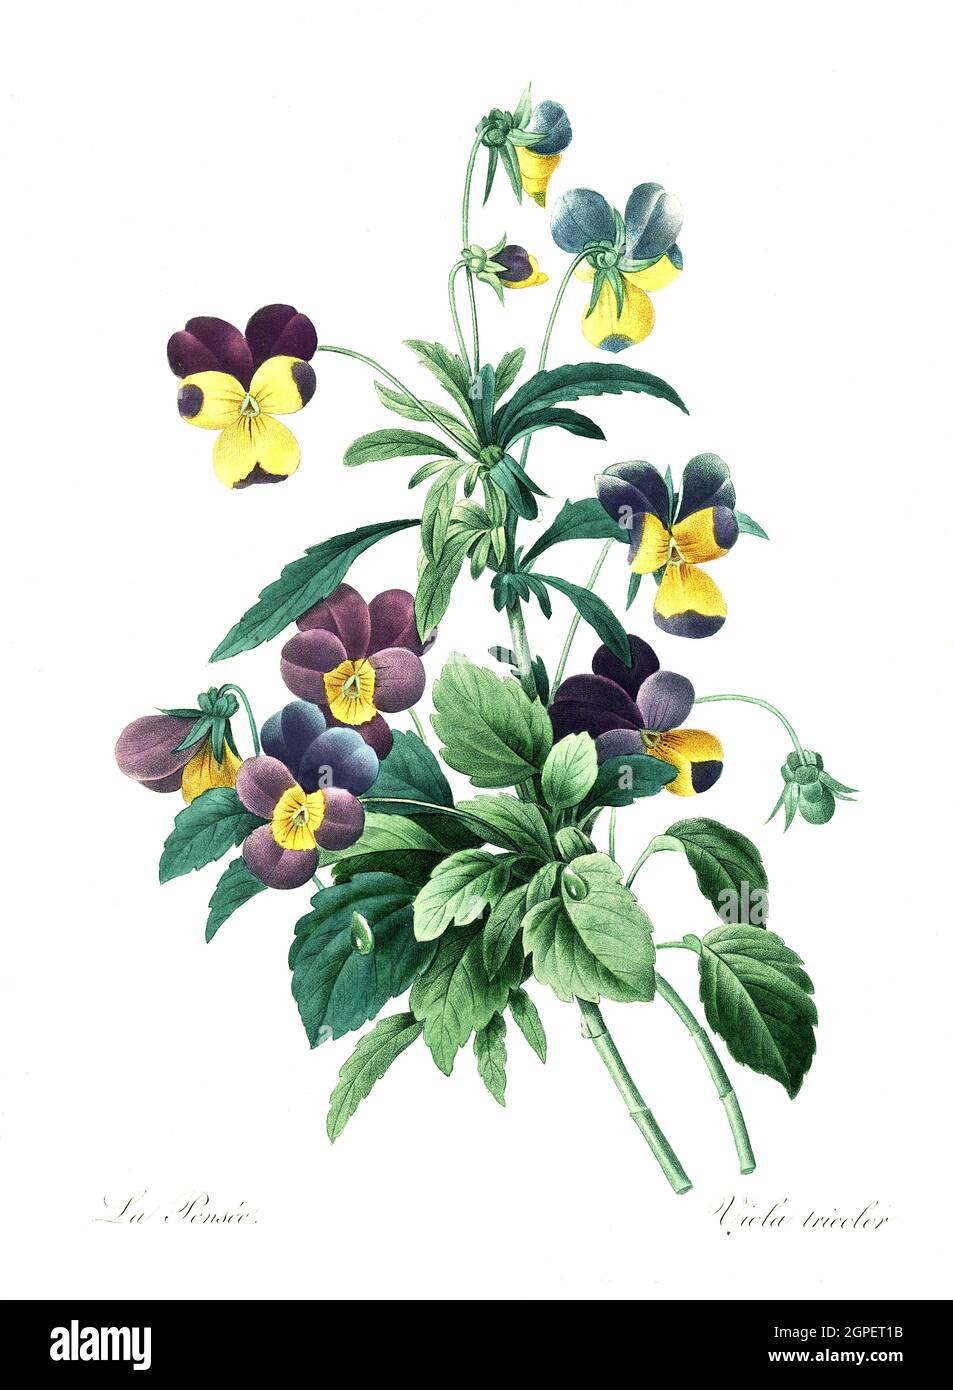 Wildes Stiefmütterchen, Viola tricolor, Ackerveilchen, Muttergottesschuh, Mädchenaugen, Schöngesicht oder Liebesgesichtli sowie Christusauge  /  Viola tricolor, also known as wild pansy, Johnny Jump up, heartsease, heart's ease, heart's delight, tickle-my-fancy, Jack-jump-up-and-kiss-me, come-and-cuddle-me, three faces in a hood, love-in-idleness, or pink of my john, is a common European wild flower, Digital aufbereitete Reproduktion einer Aquarellzeichnung aus dem Jahre 1827, von P.J.Redoue, Kupfertafel  /  Digitally processed reproduction of a watercolor drawing from 1827, by P.J. Redoue, co Stock Photo